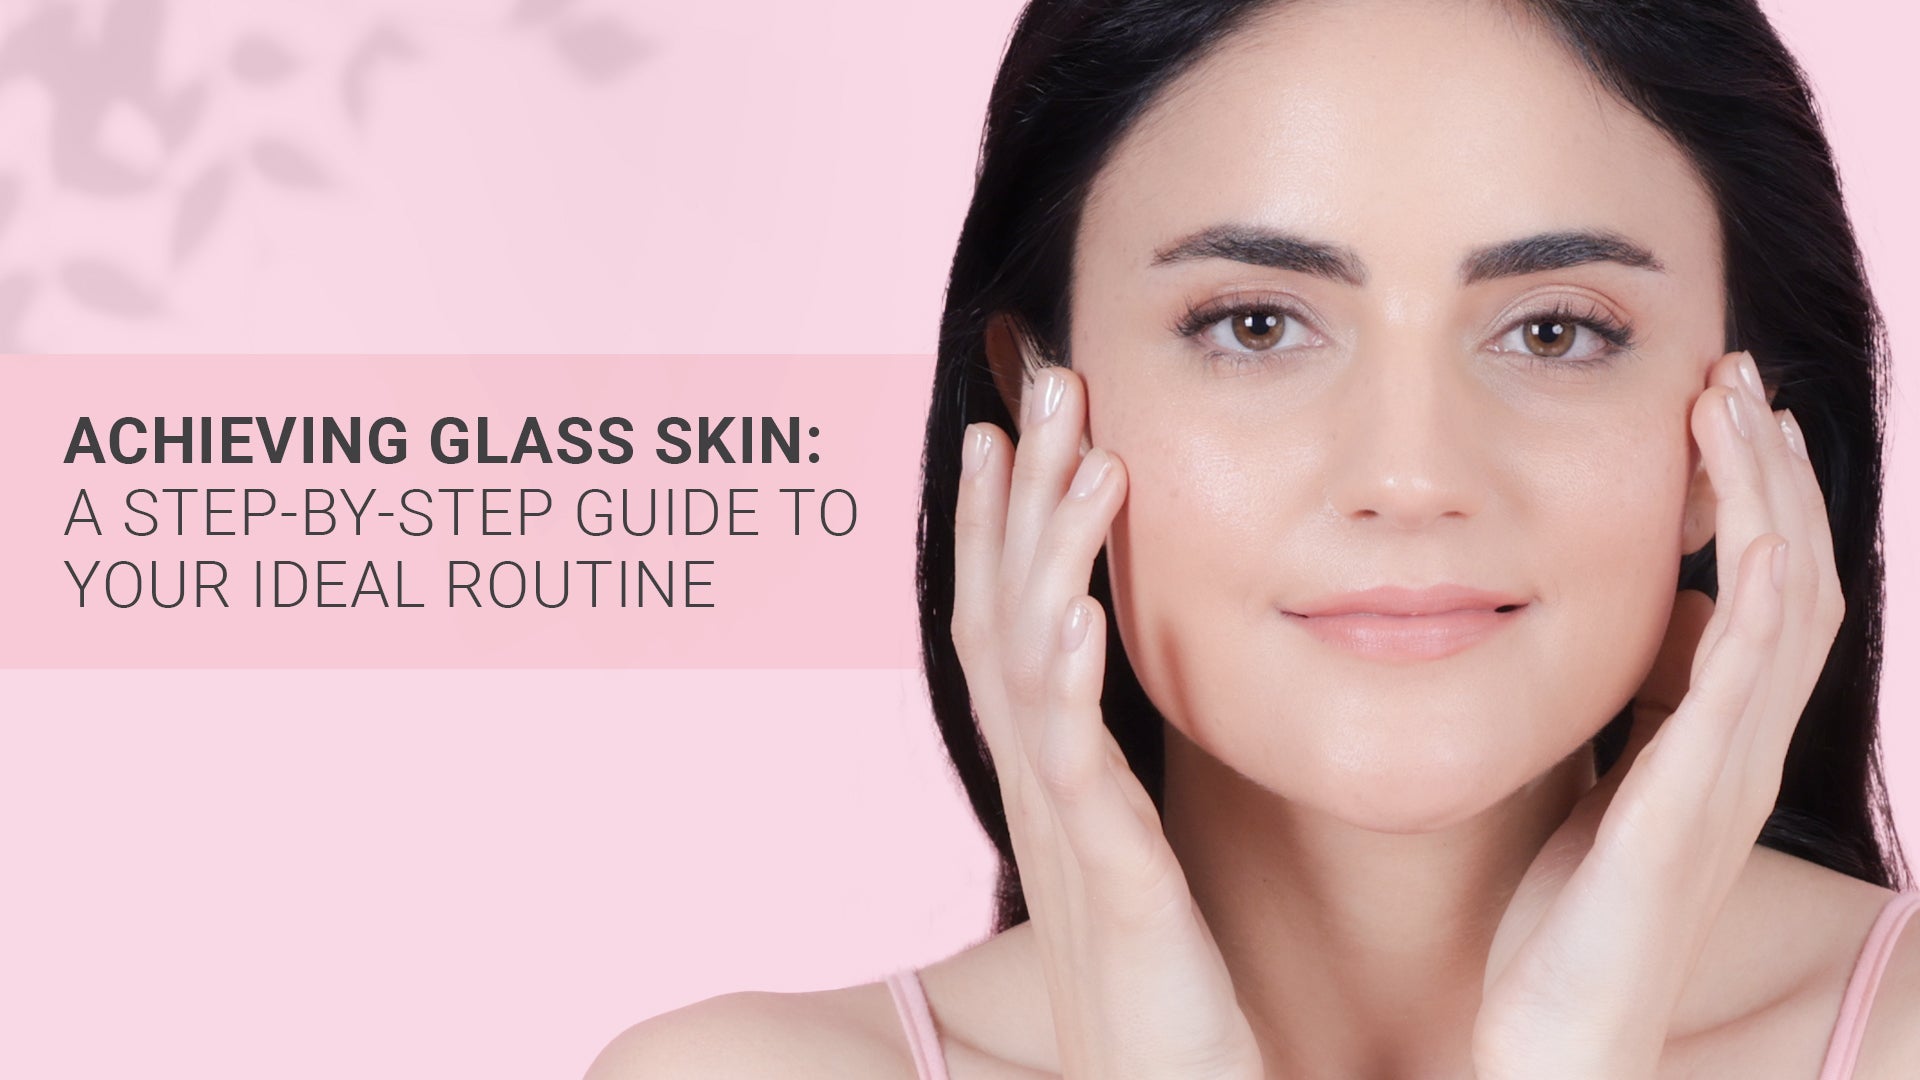 Achieving Glass Skin: A Step-by-Step Guide to Your Ideal Routine